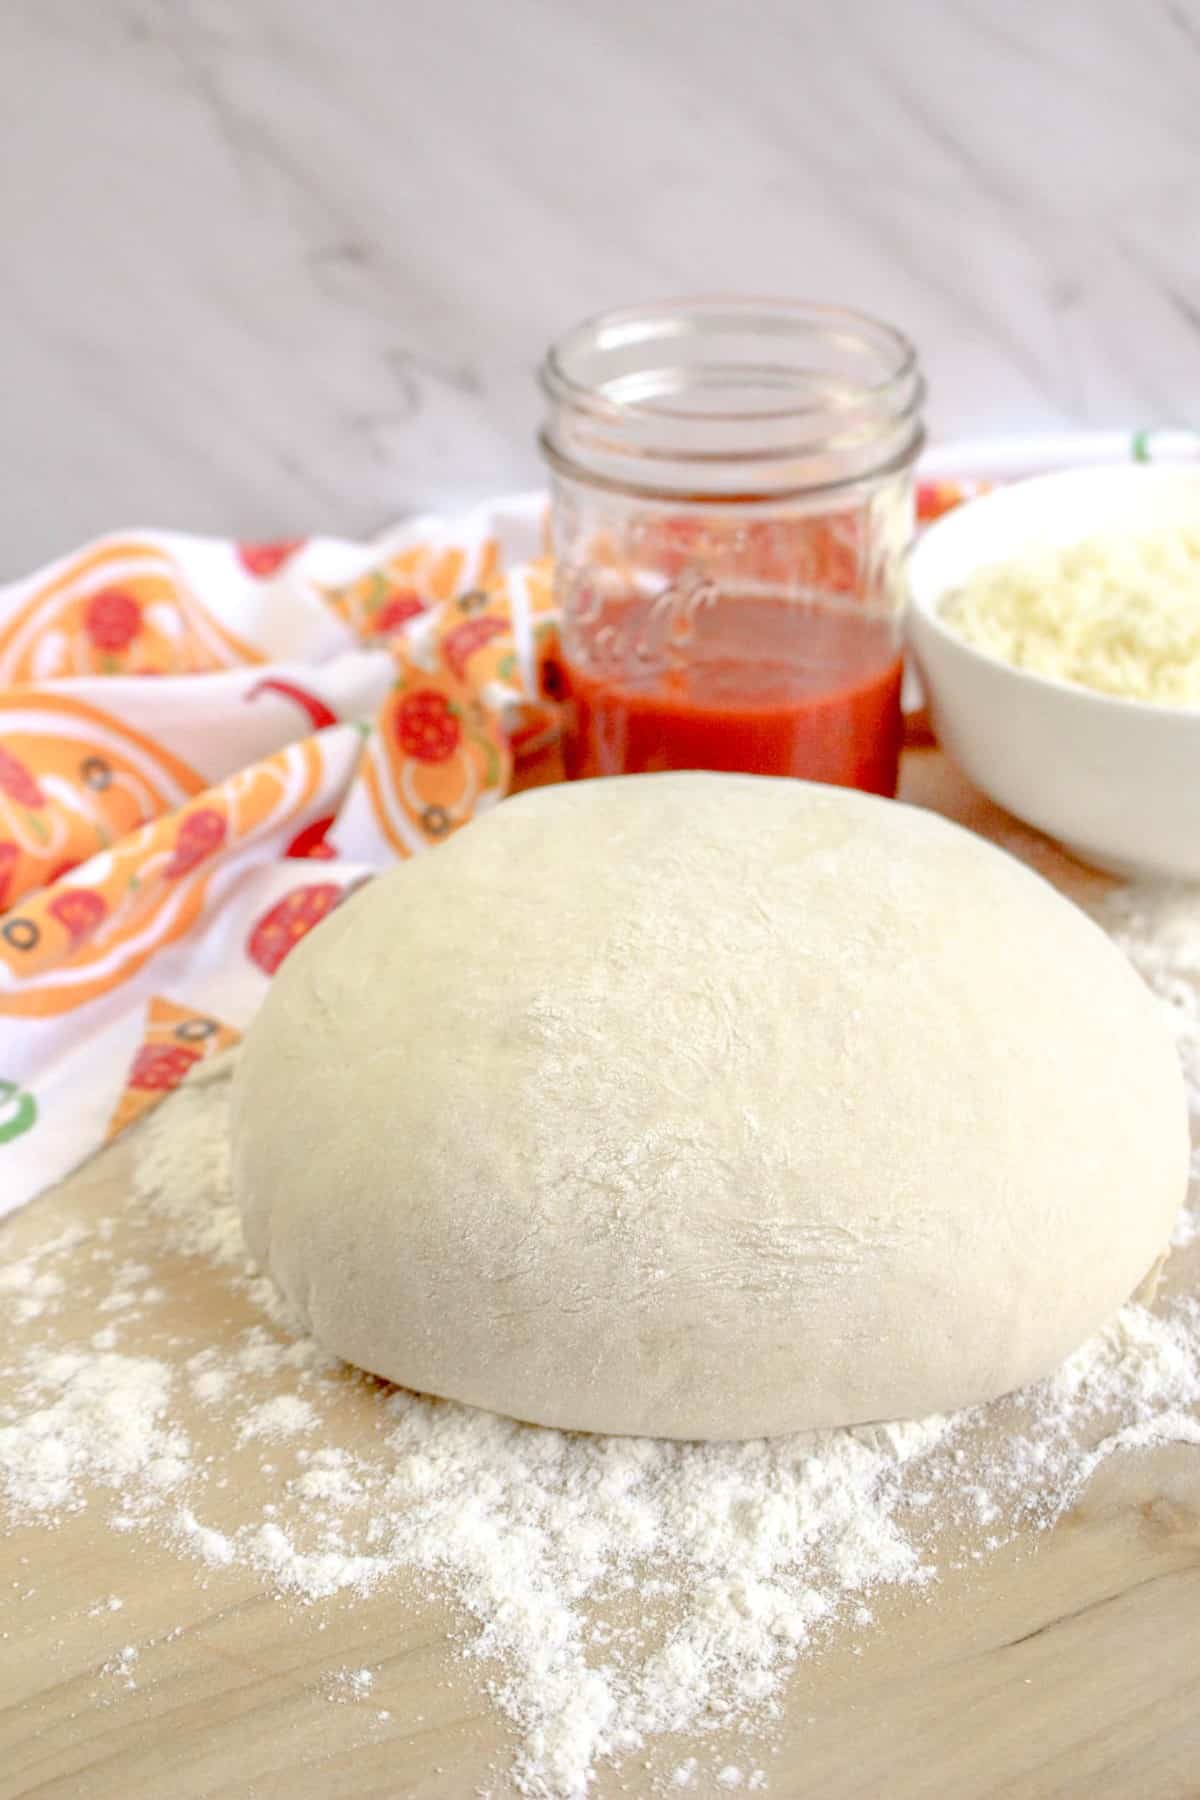 Ball of pizza dough resting on a floured surface with pizza sauce and grated cheese in bowls behind the dough.